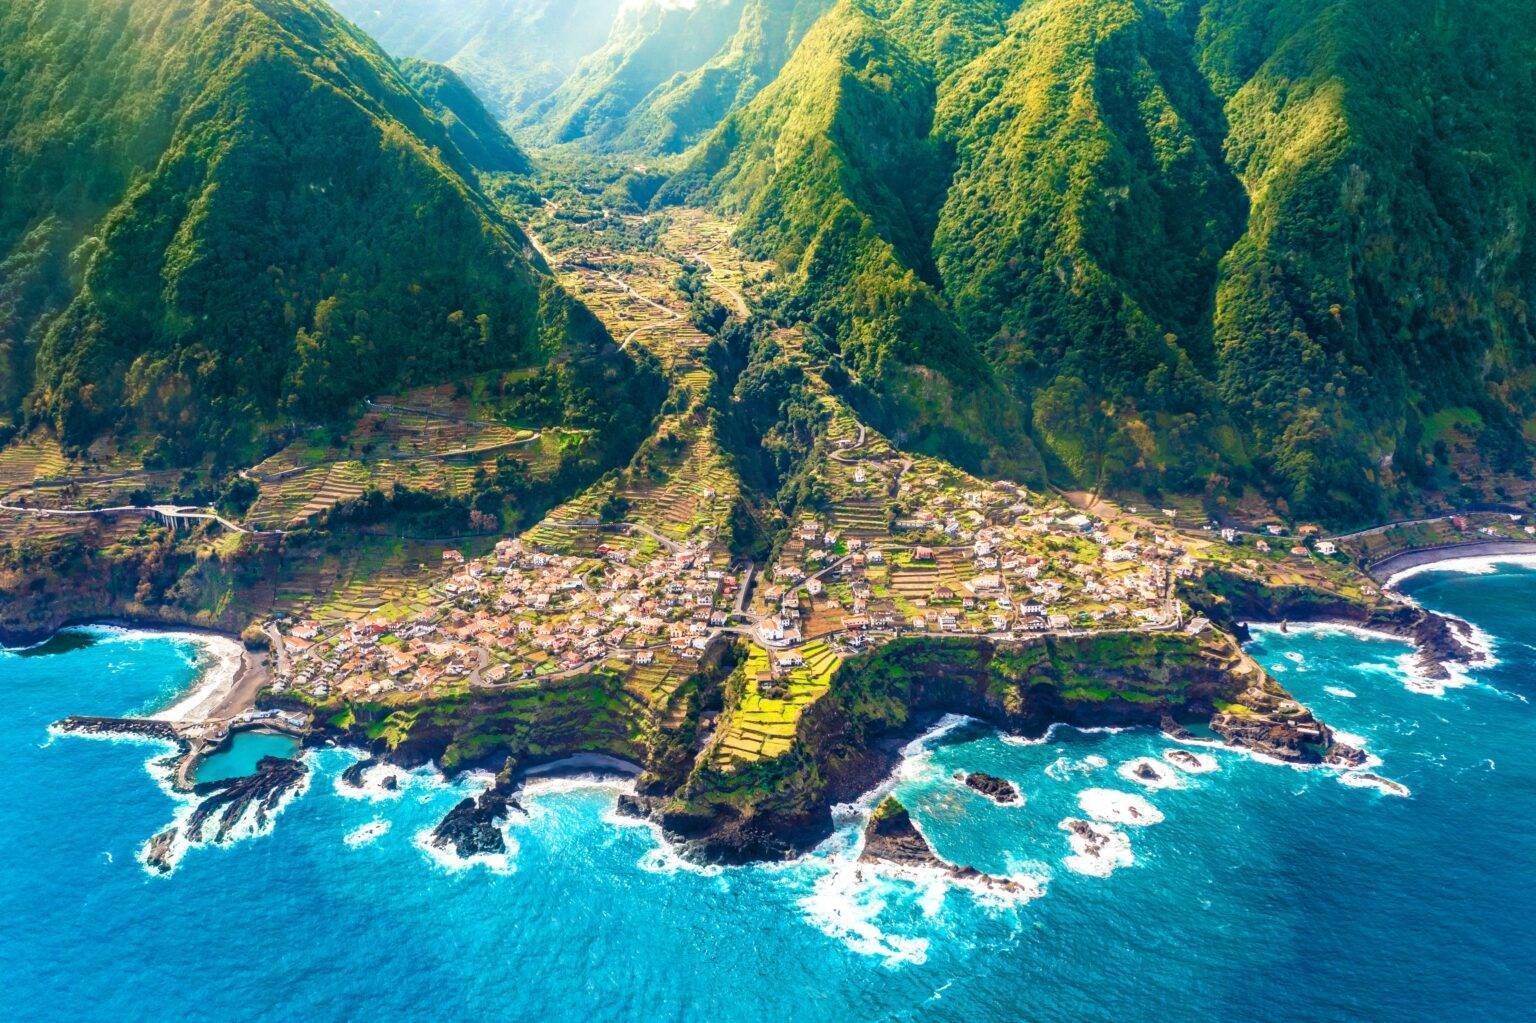 ‘Hawaii of Europe’ is a spectacular destination with flights from £71